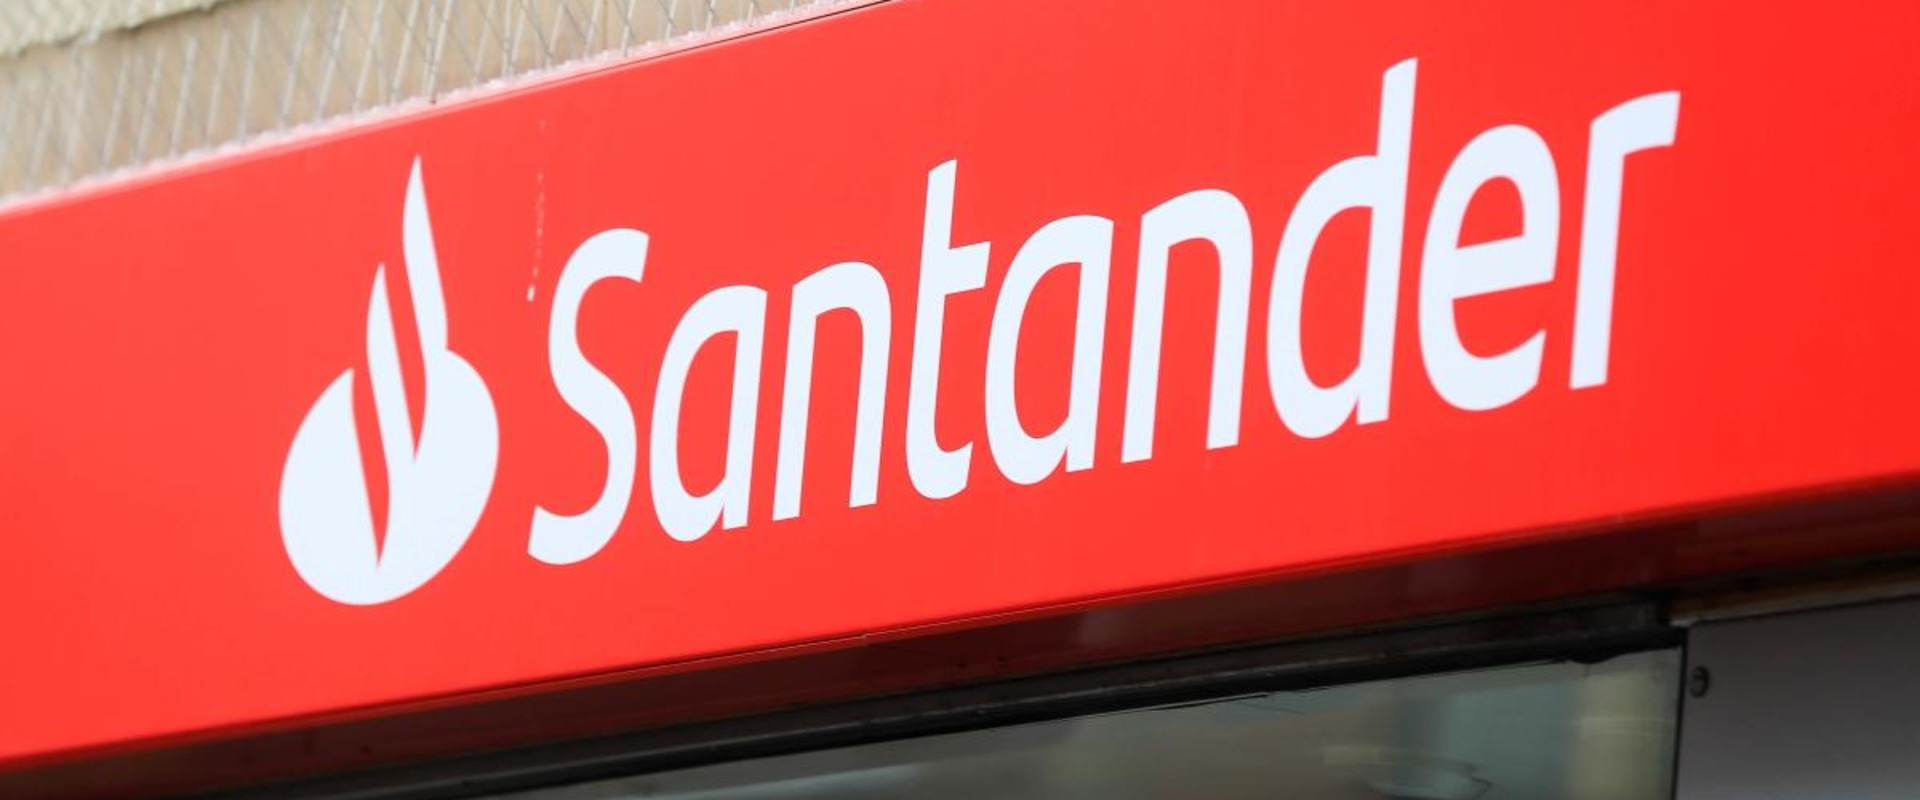 Repayment Plans for Santander Mortgages: All You Need to Know